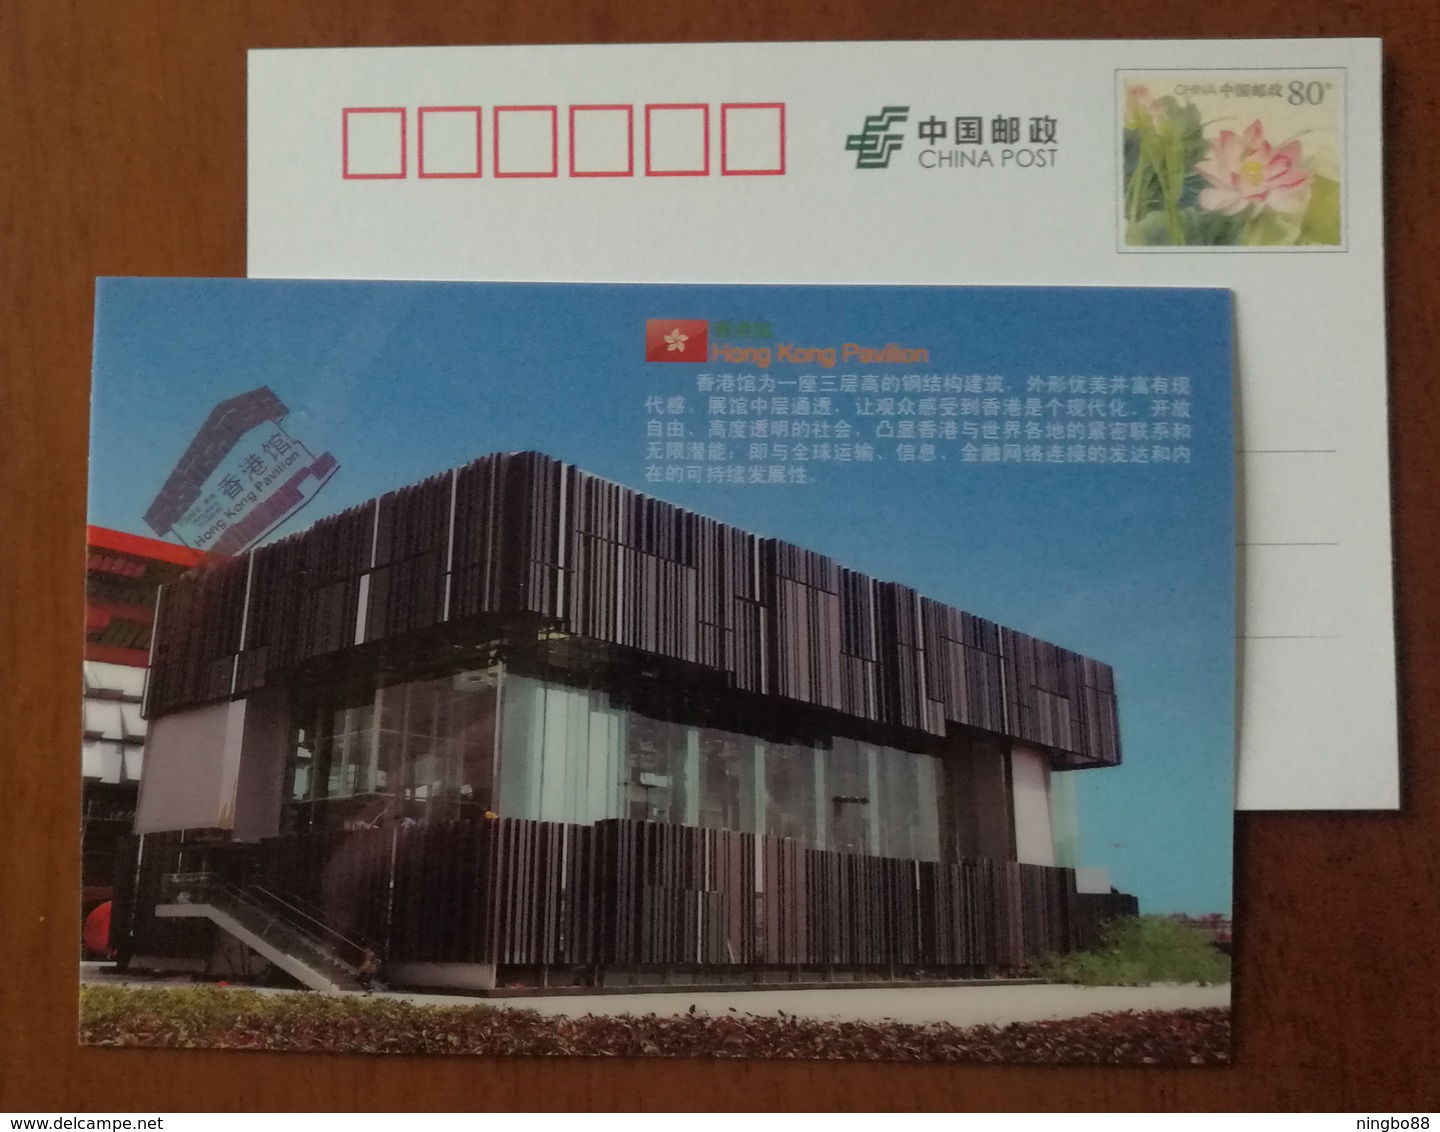 Hong Kong Pavilion Architecture,China 2010 Expo 2010 Shanghai World Exposition Advertising Pre-stamped Card - 2010 – Shanghai (Chine)